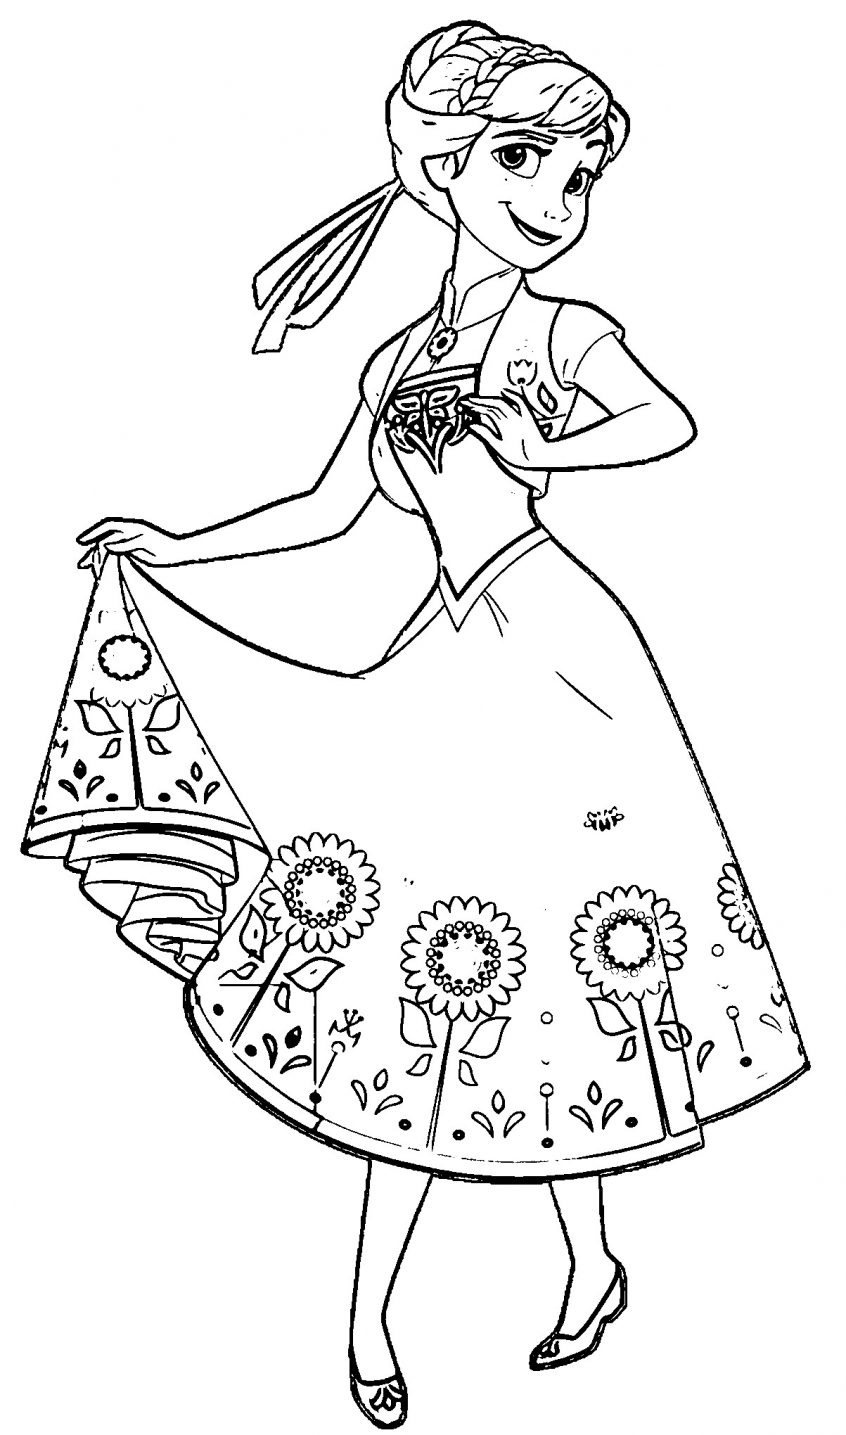 Coloring Pages : Coloring Pages Elsa And Anna To Print ...